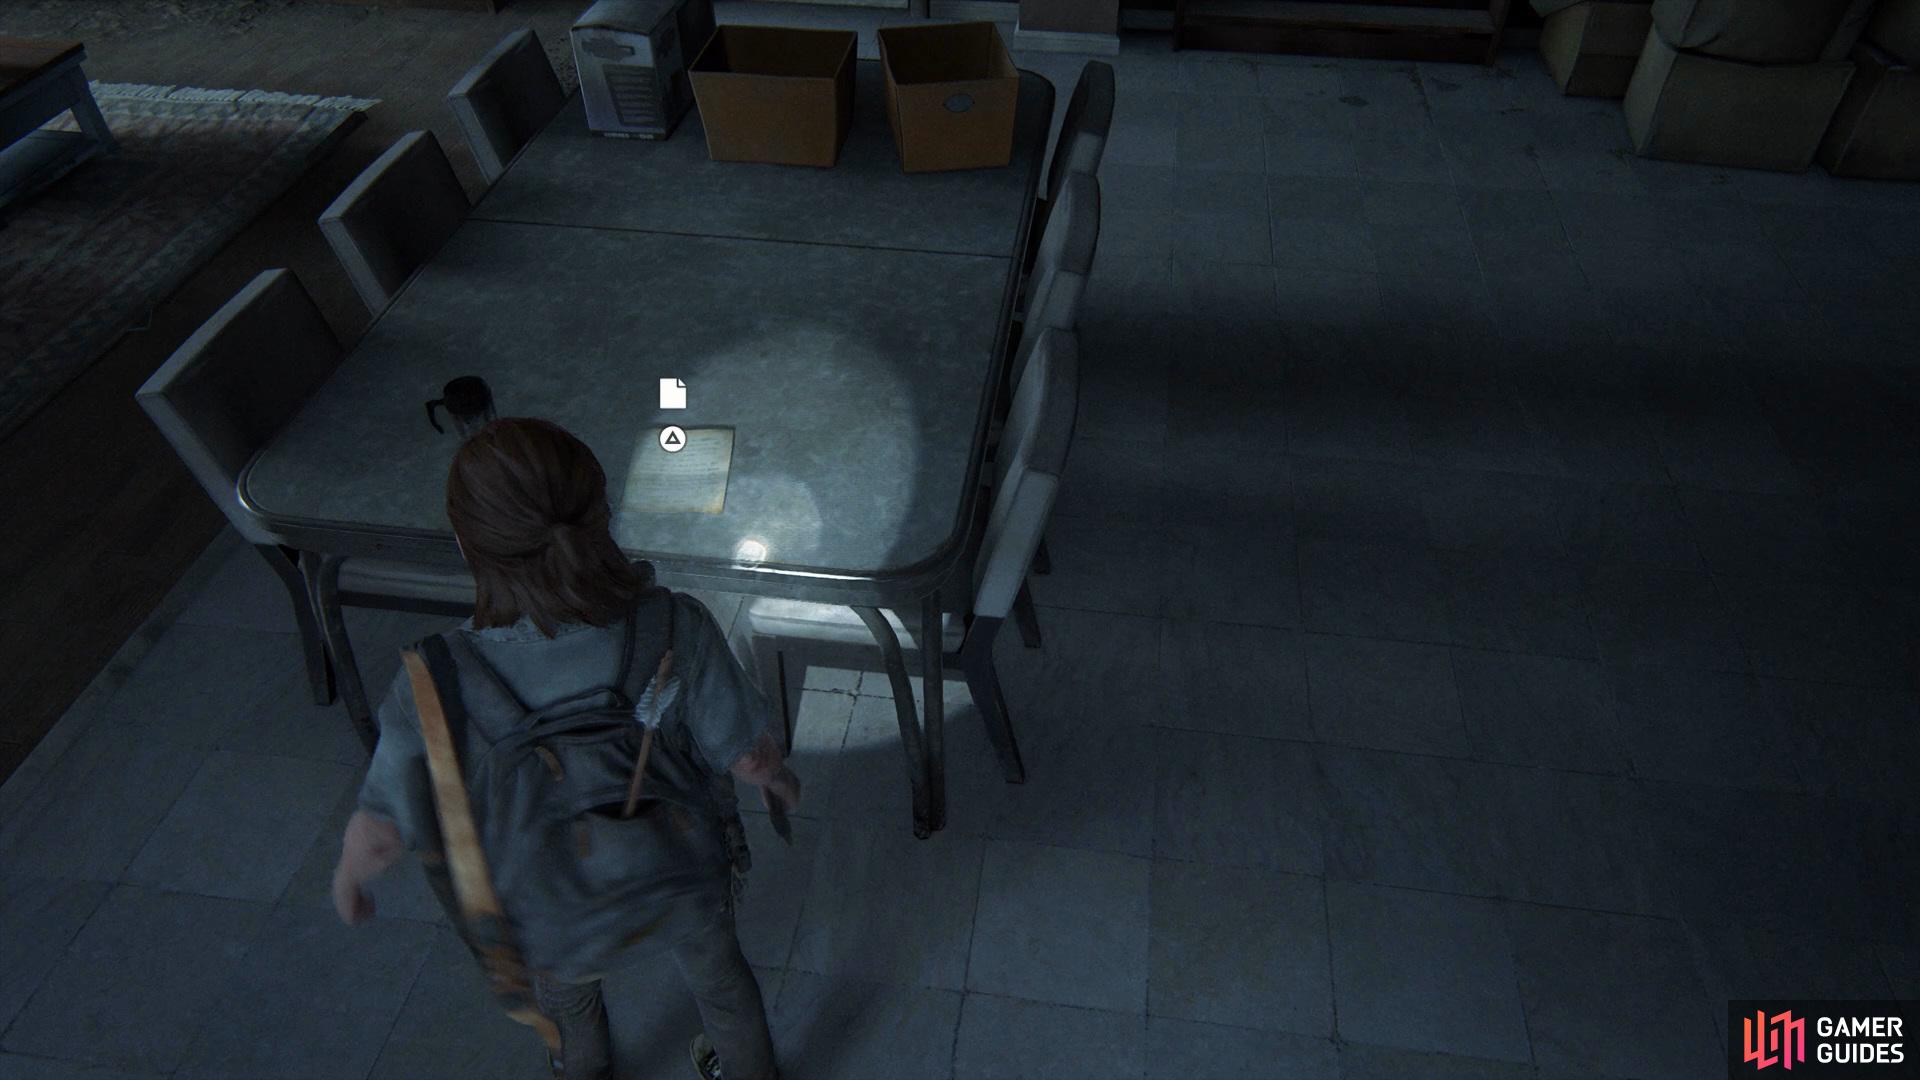 Use the truck to reach the buildings second floor, then go into the room on the right to find an Artefact on the table